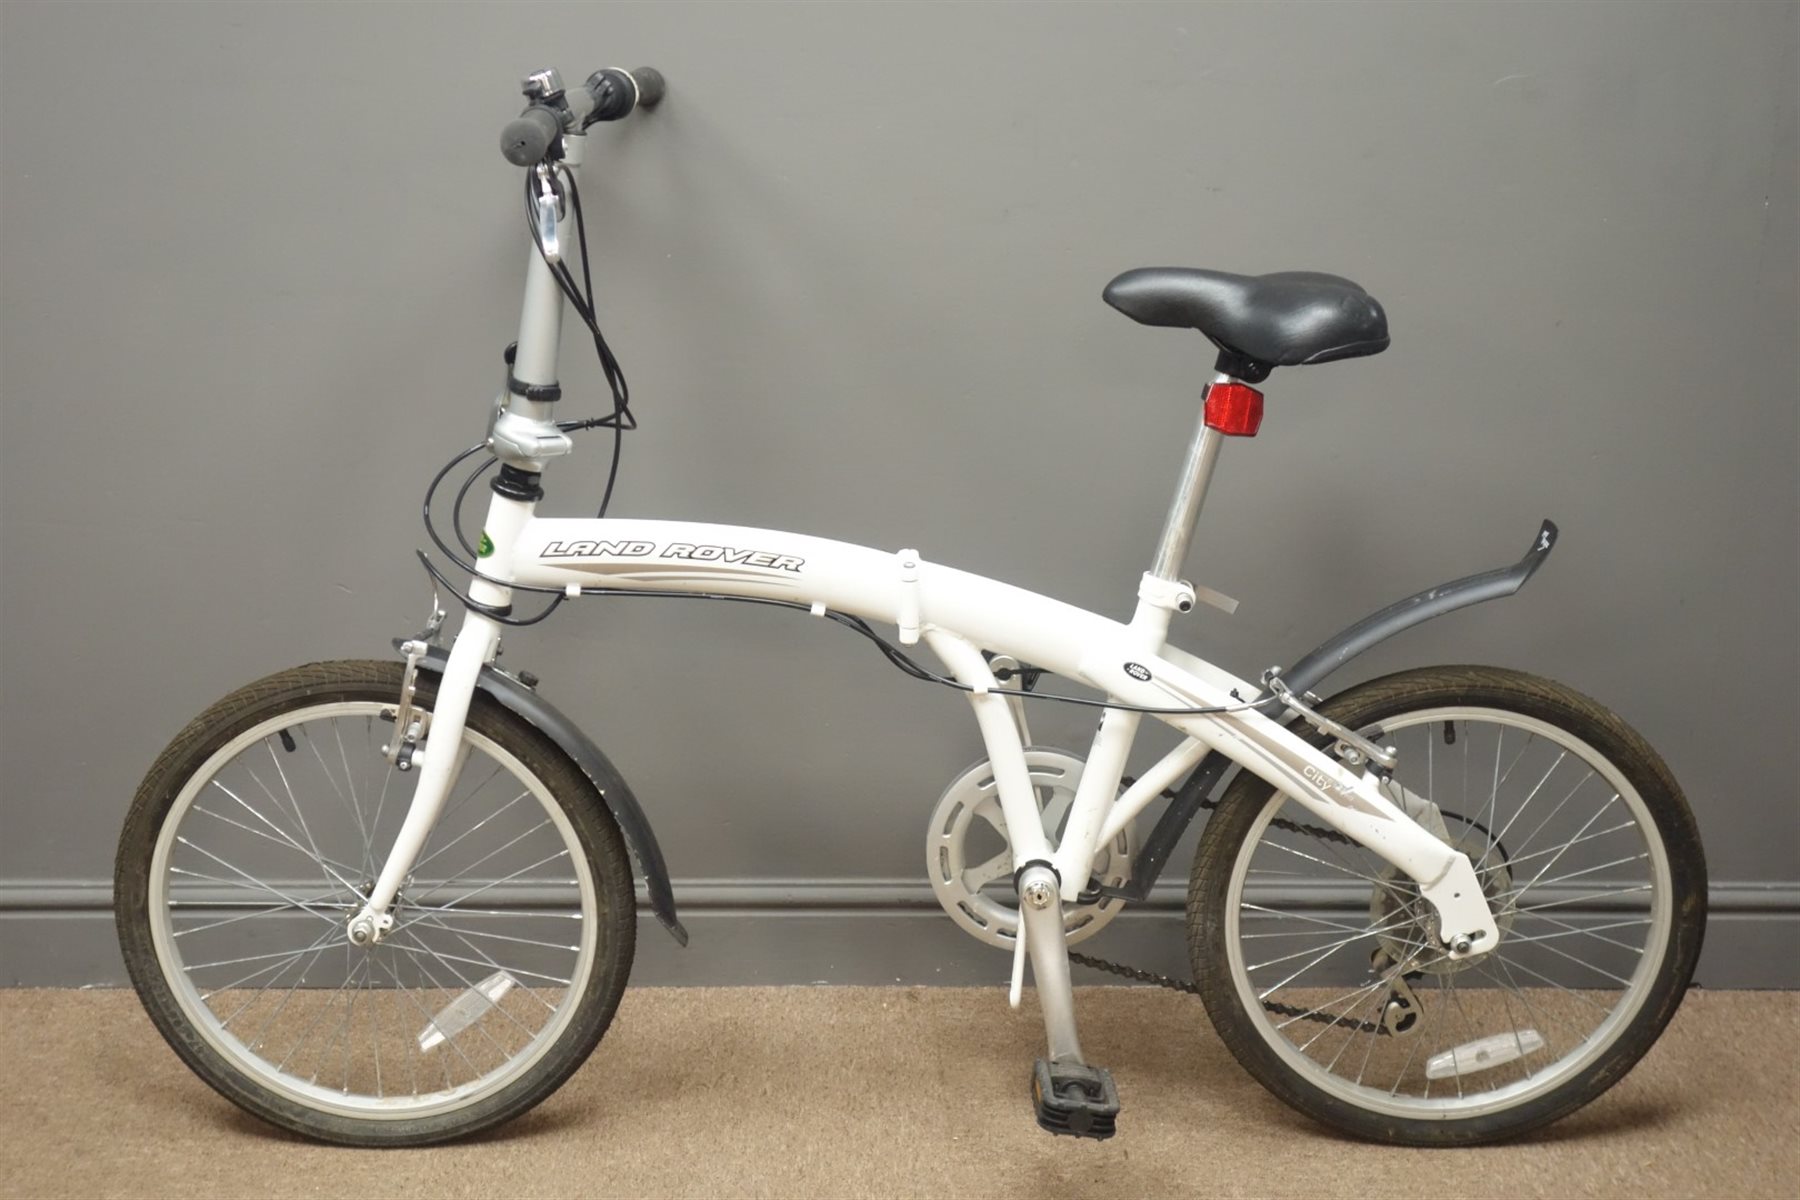 Land rover folding bike, 6-speed, with carry bag - Antiques & Interiors